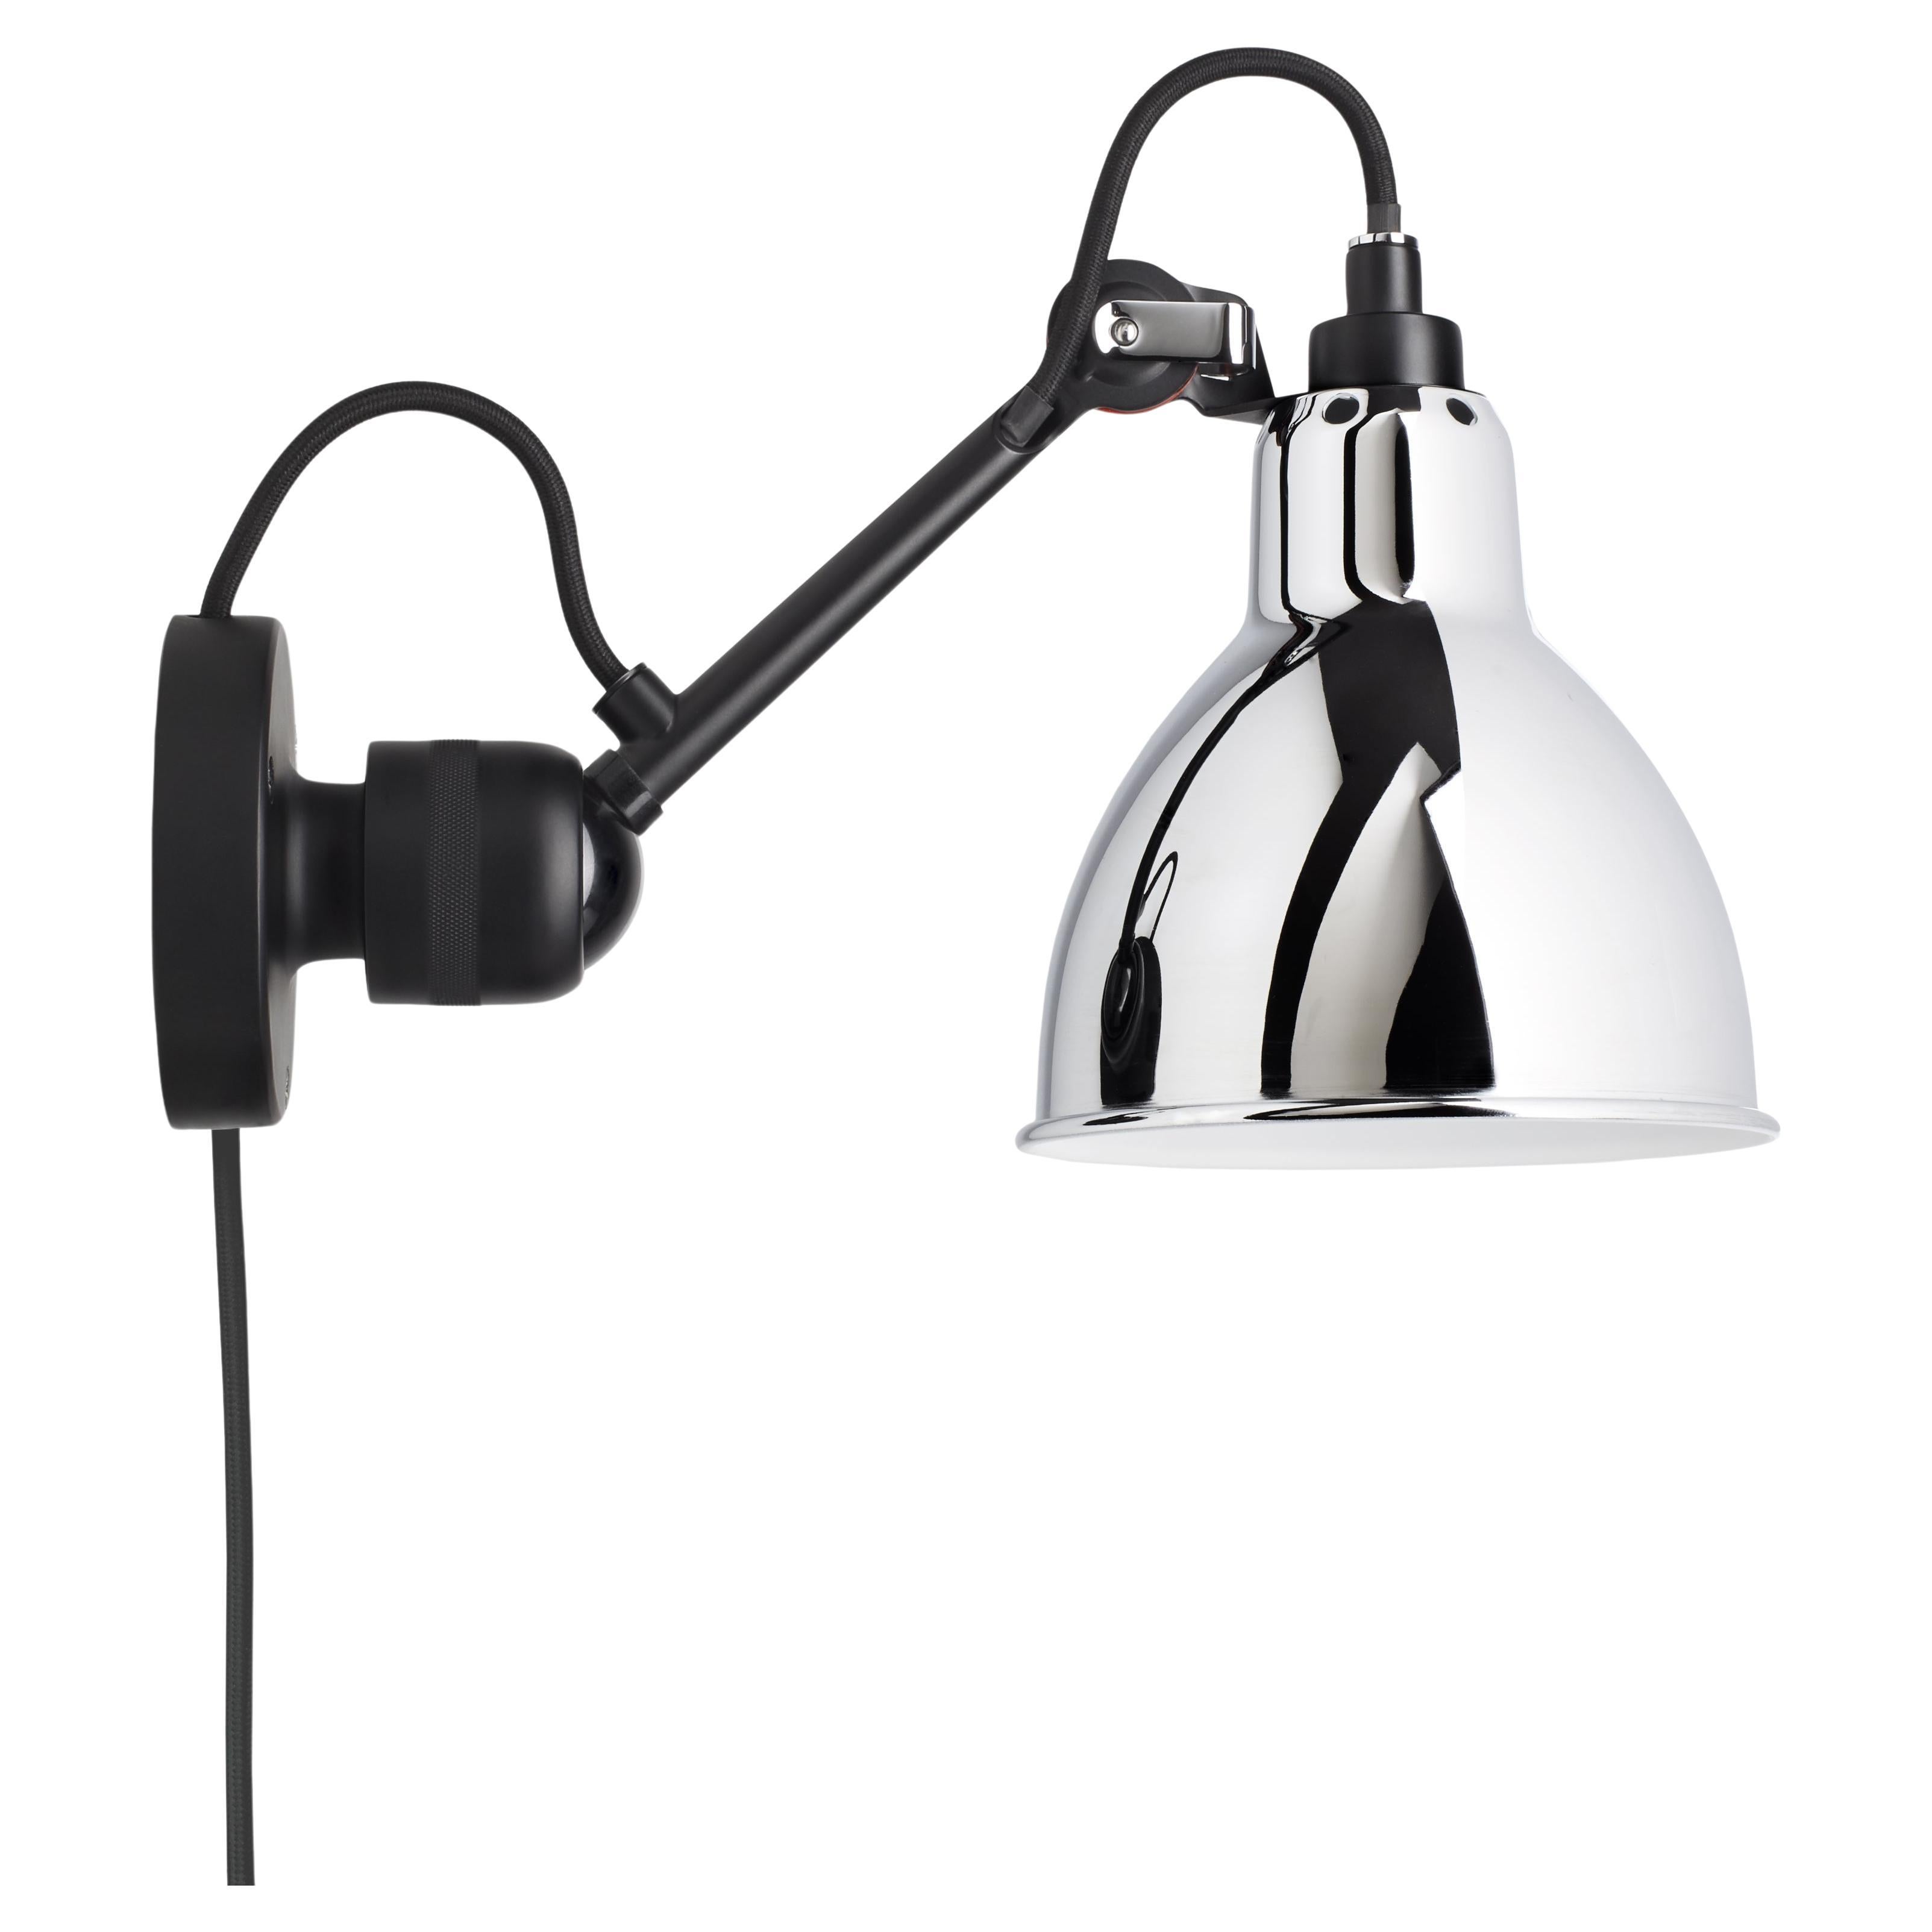 DCW Editions La Lampe Gras N°304 CA Wall Lamp in Black Arm and Chrome Shade For Sale